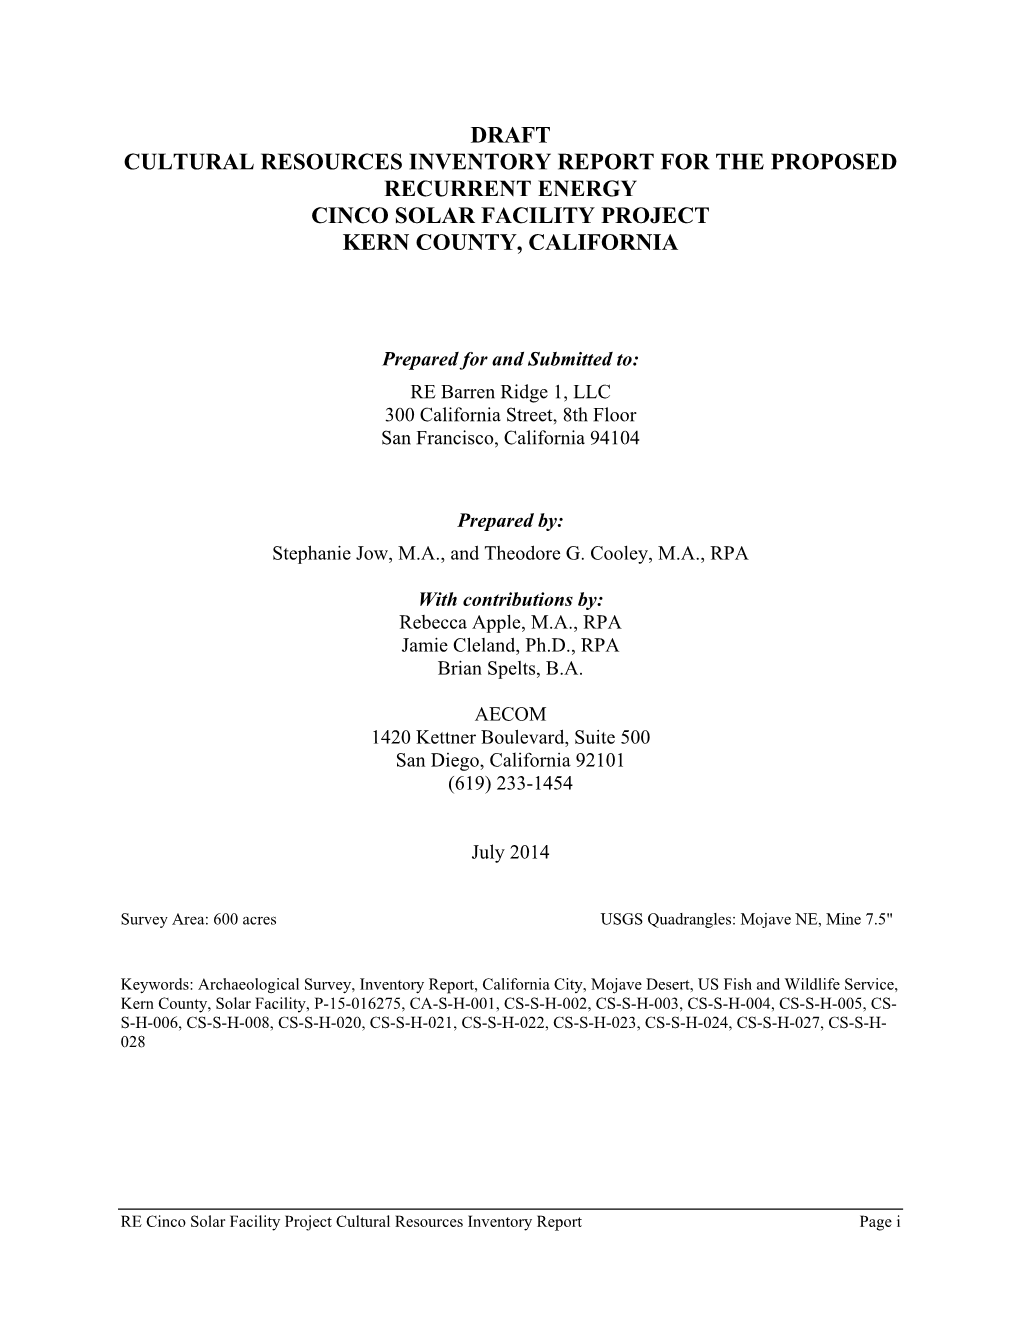 Draft Cultural Resources Inventory Report for the Proposed Recurrent Energy Cinco Solar Facility Project Kern County, California